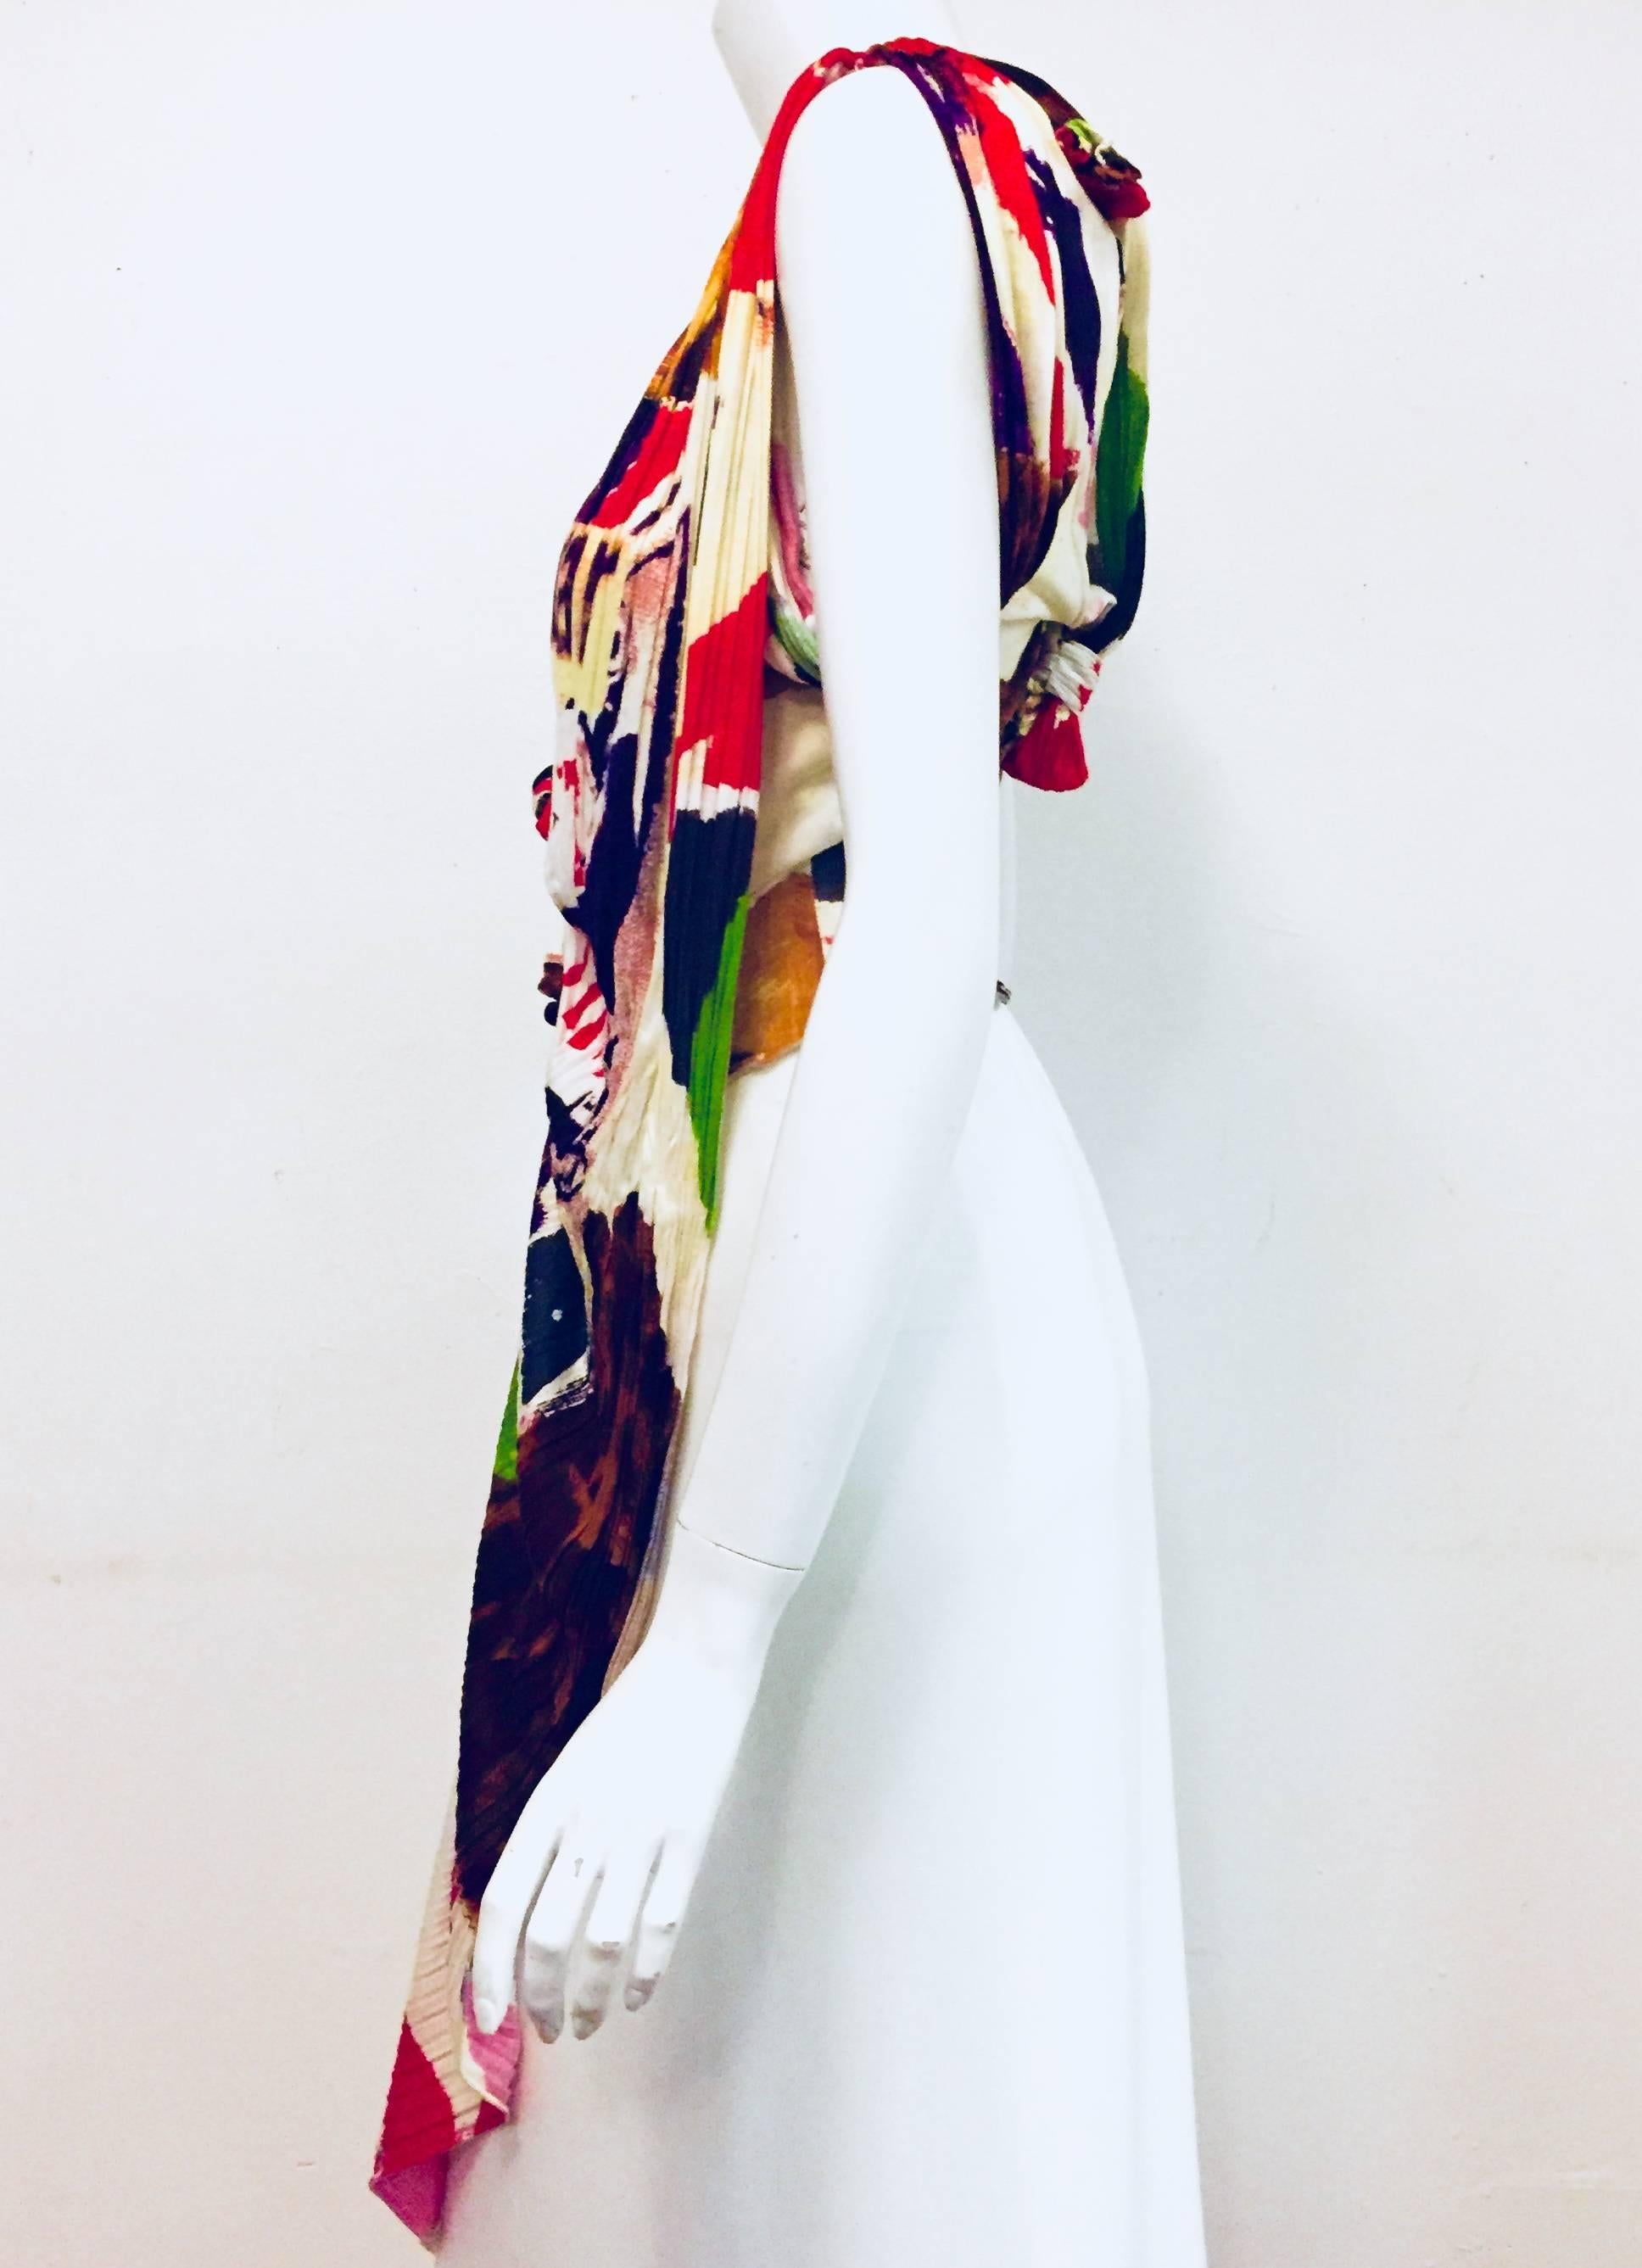 Christian Dior multi color mixed print top featuring different lengths in front and at back.  This avant garde V neck top is sleeveless and it has two tuxedo style tails for added enhancement.  The fabric has been accordion pleated in certain areas,